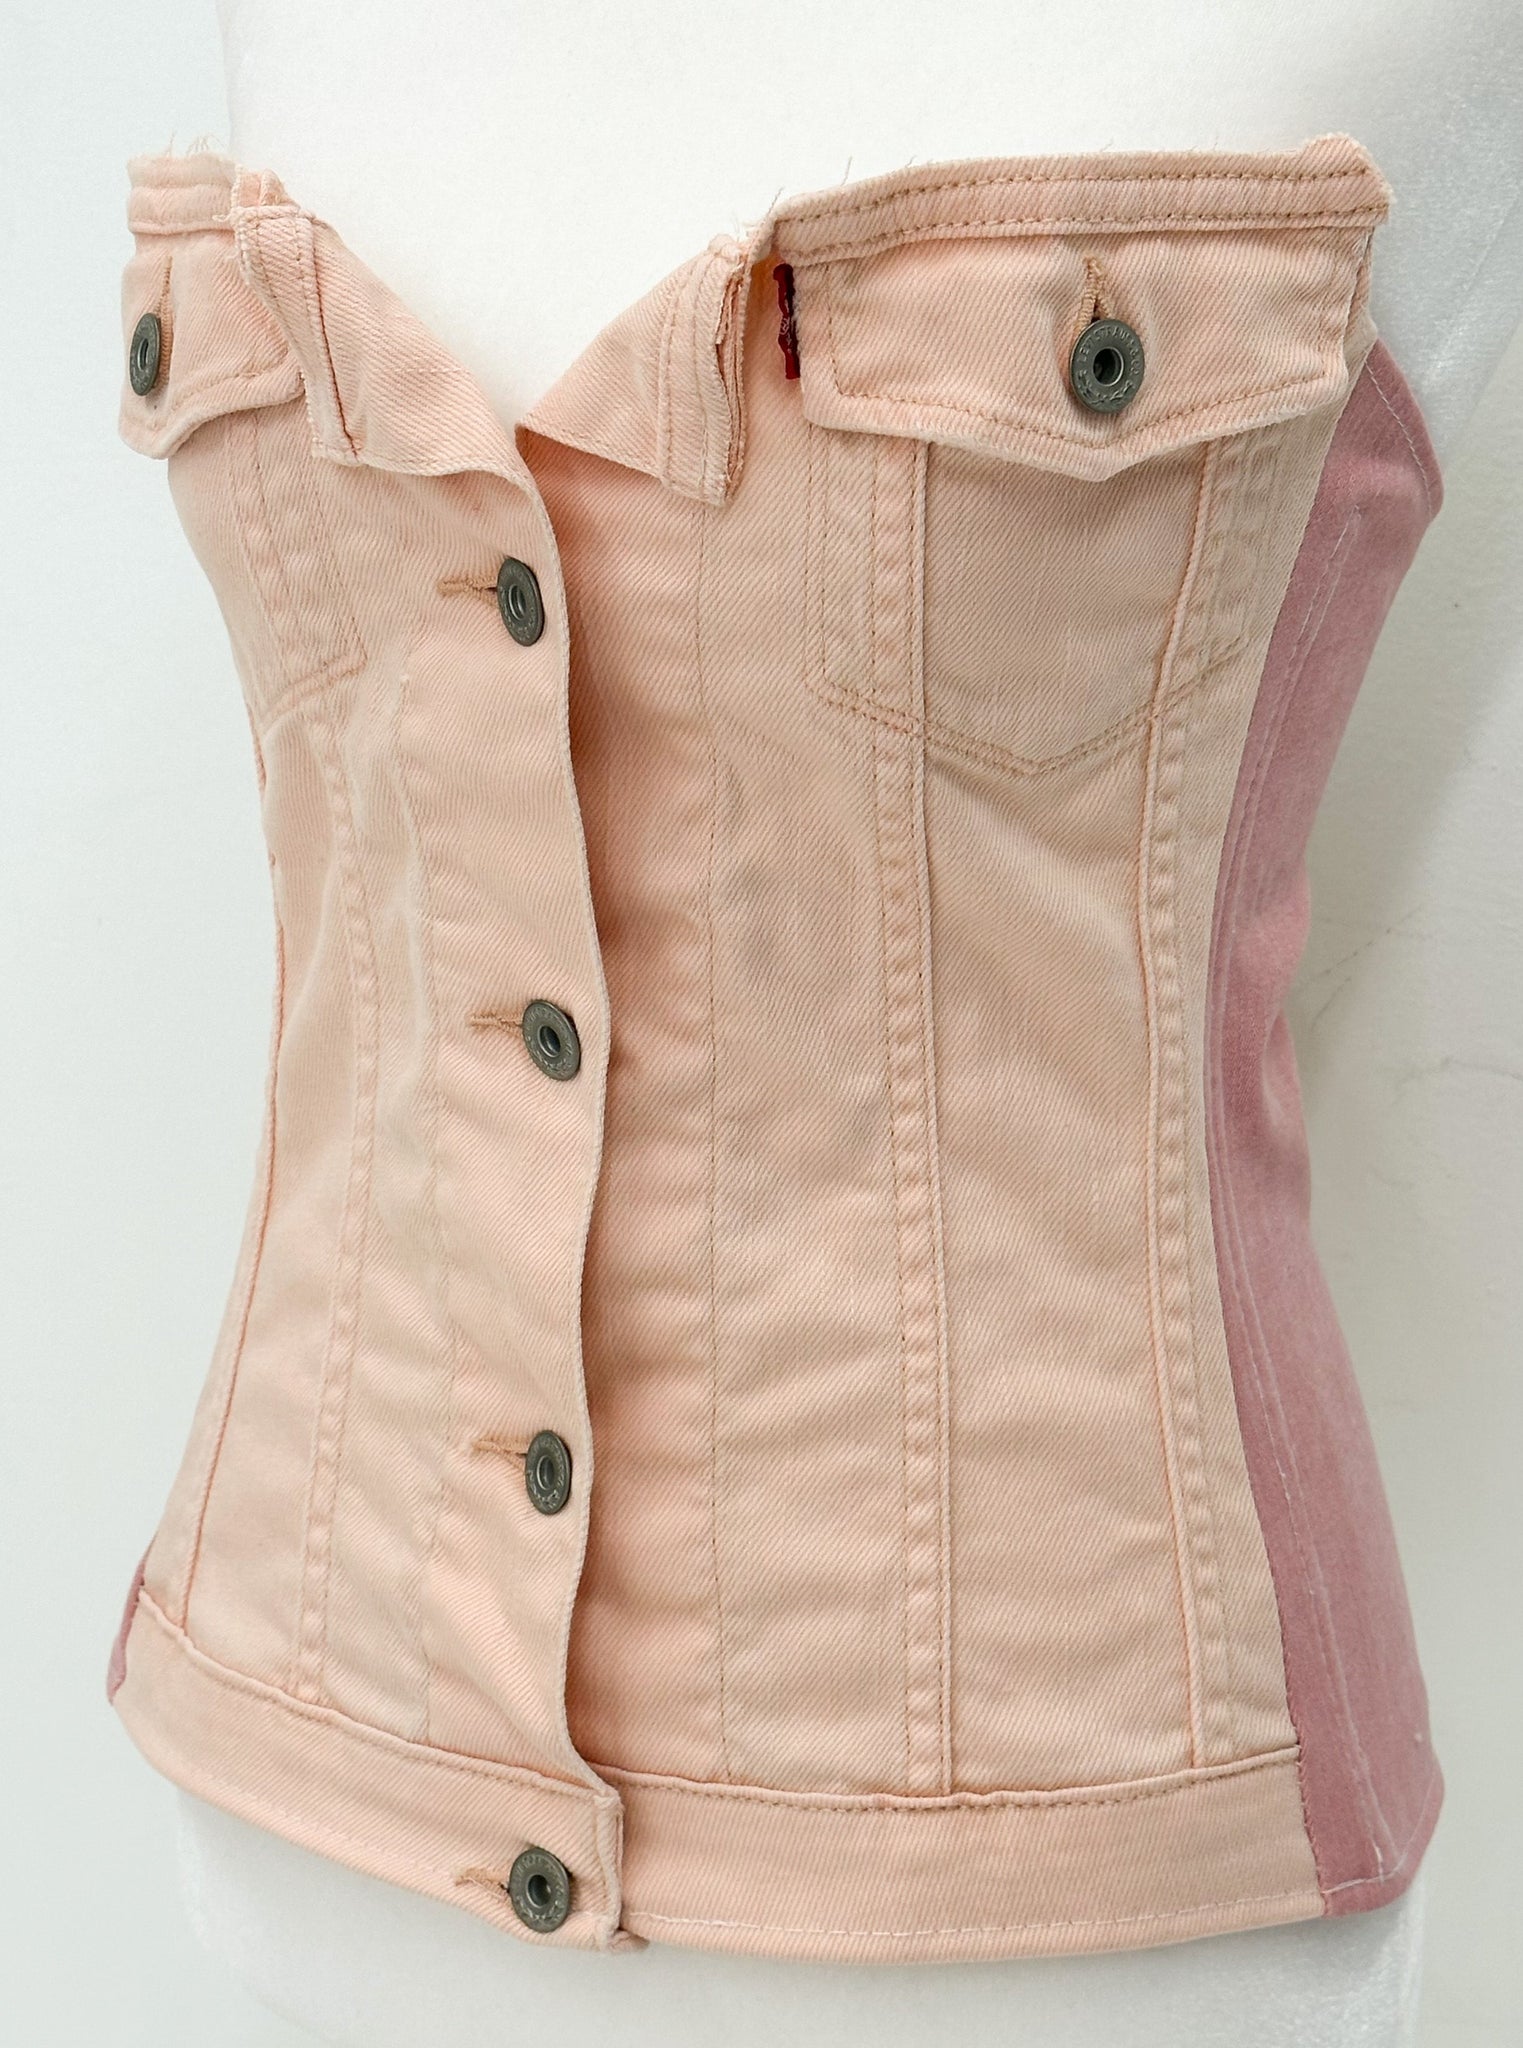 TWO TONE PINK CORSET